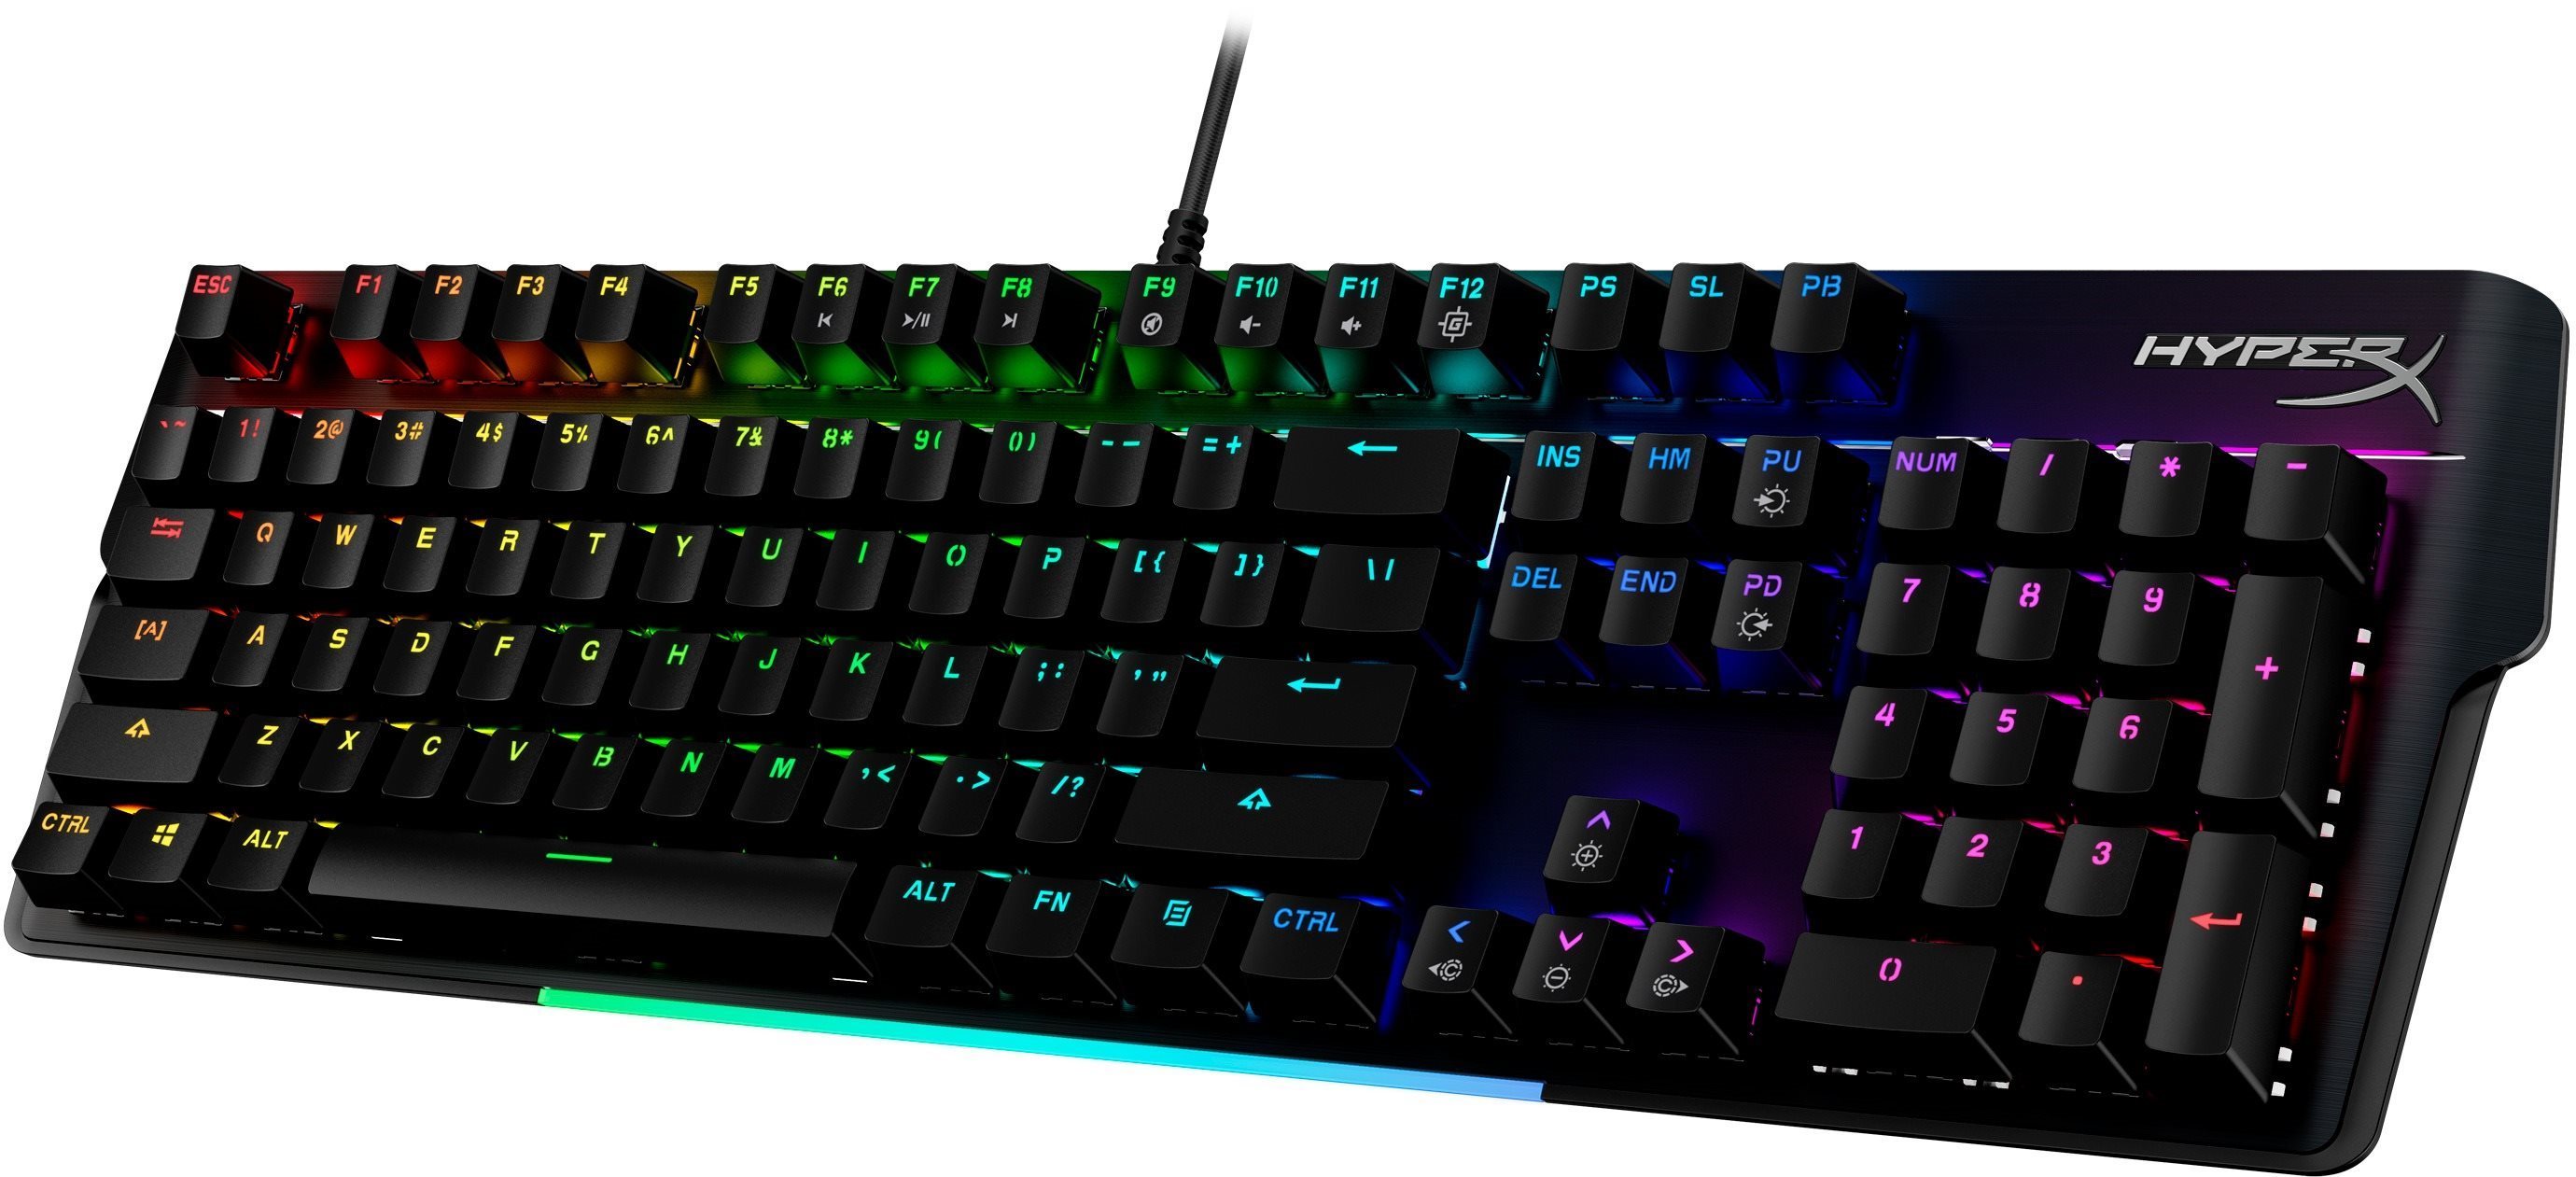 Gaming Keyboard HyperX Alloy MKW100 Lateral view